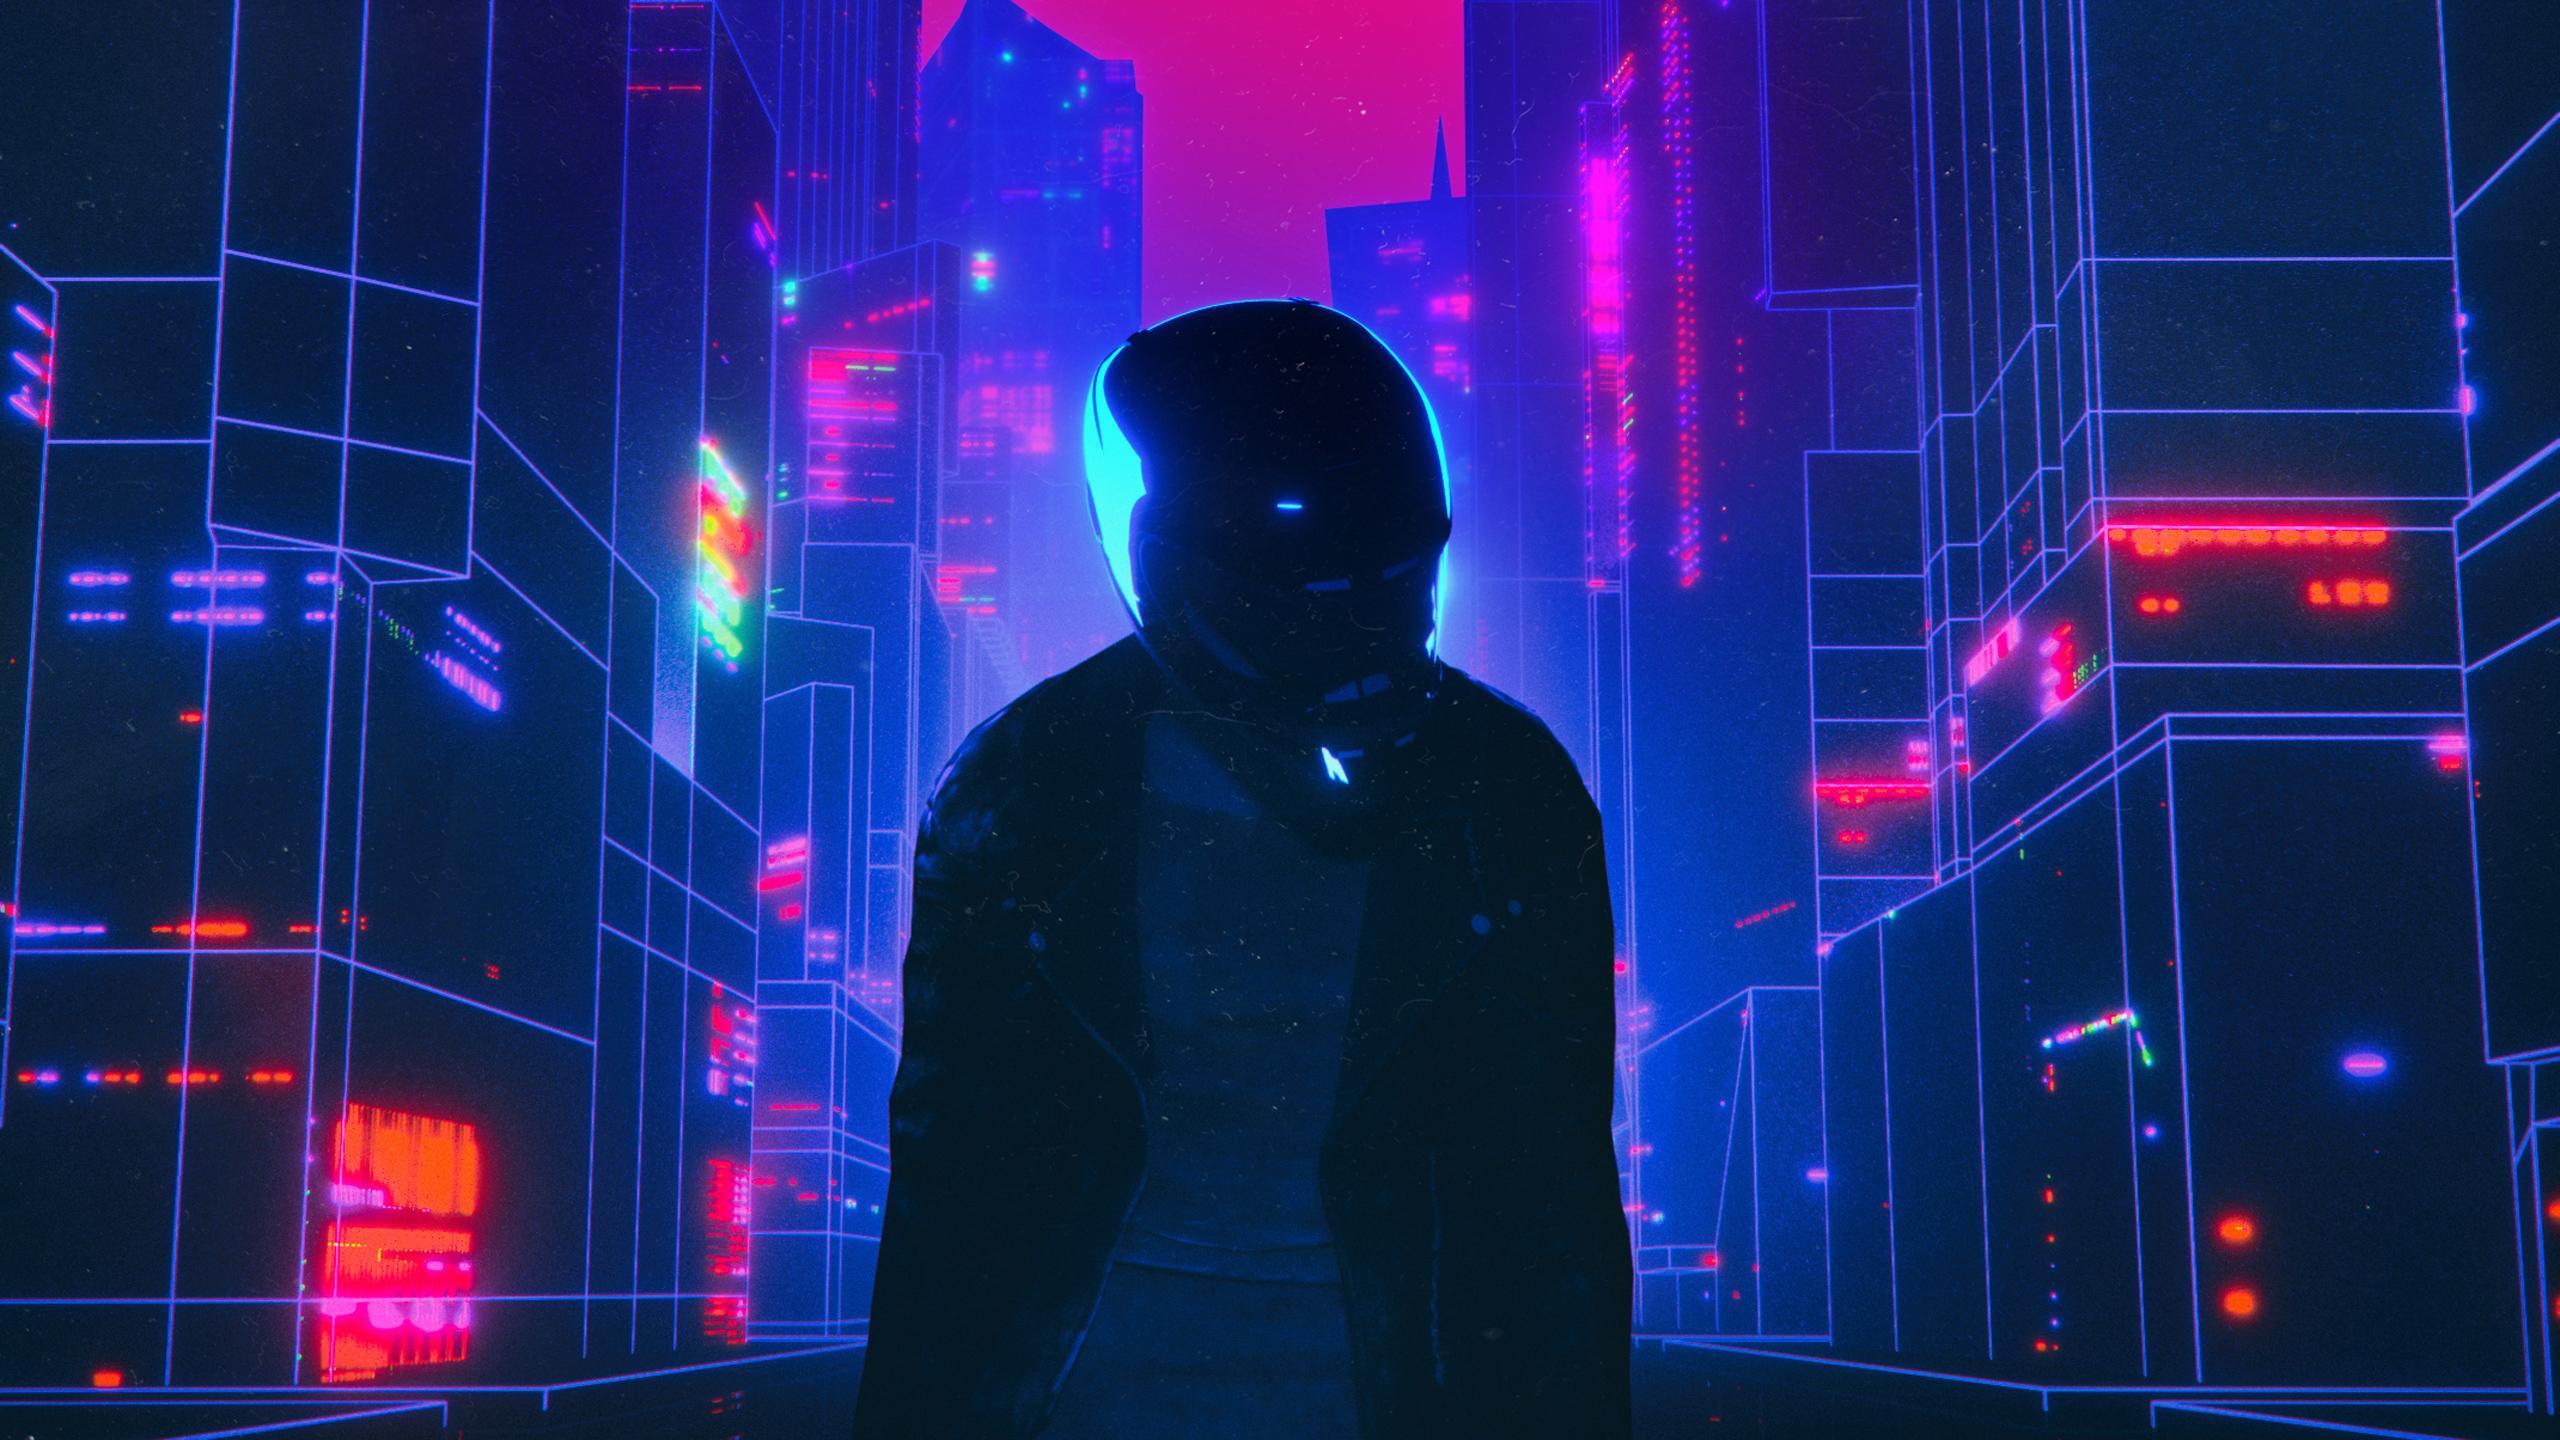 Biker Retrowave, HD Artist, 4k Wallpaper, Image, Background, Photo and Picture